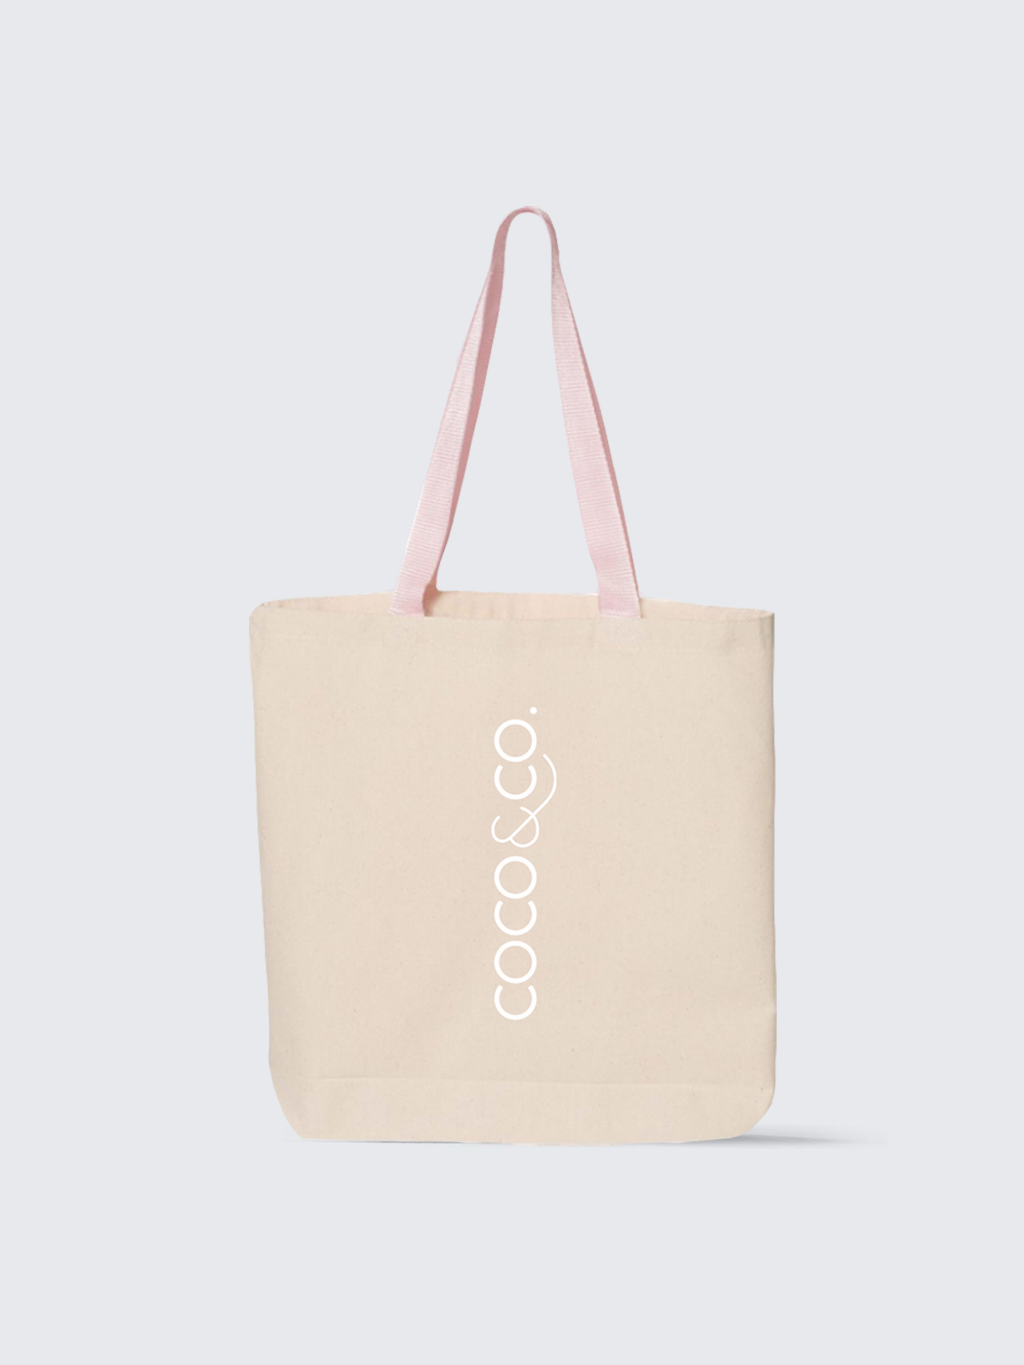 Fling Tote - COCO & CO. Beauty